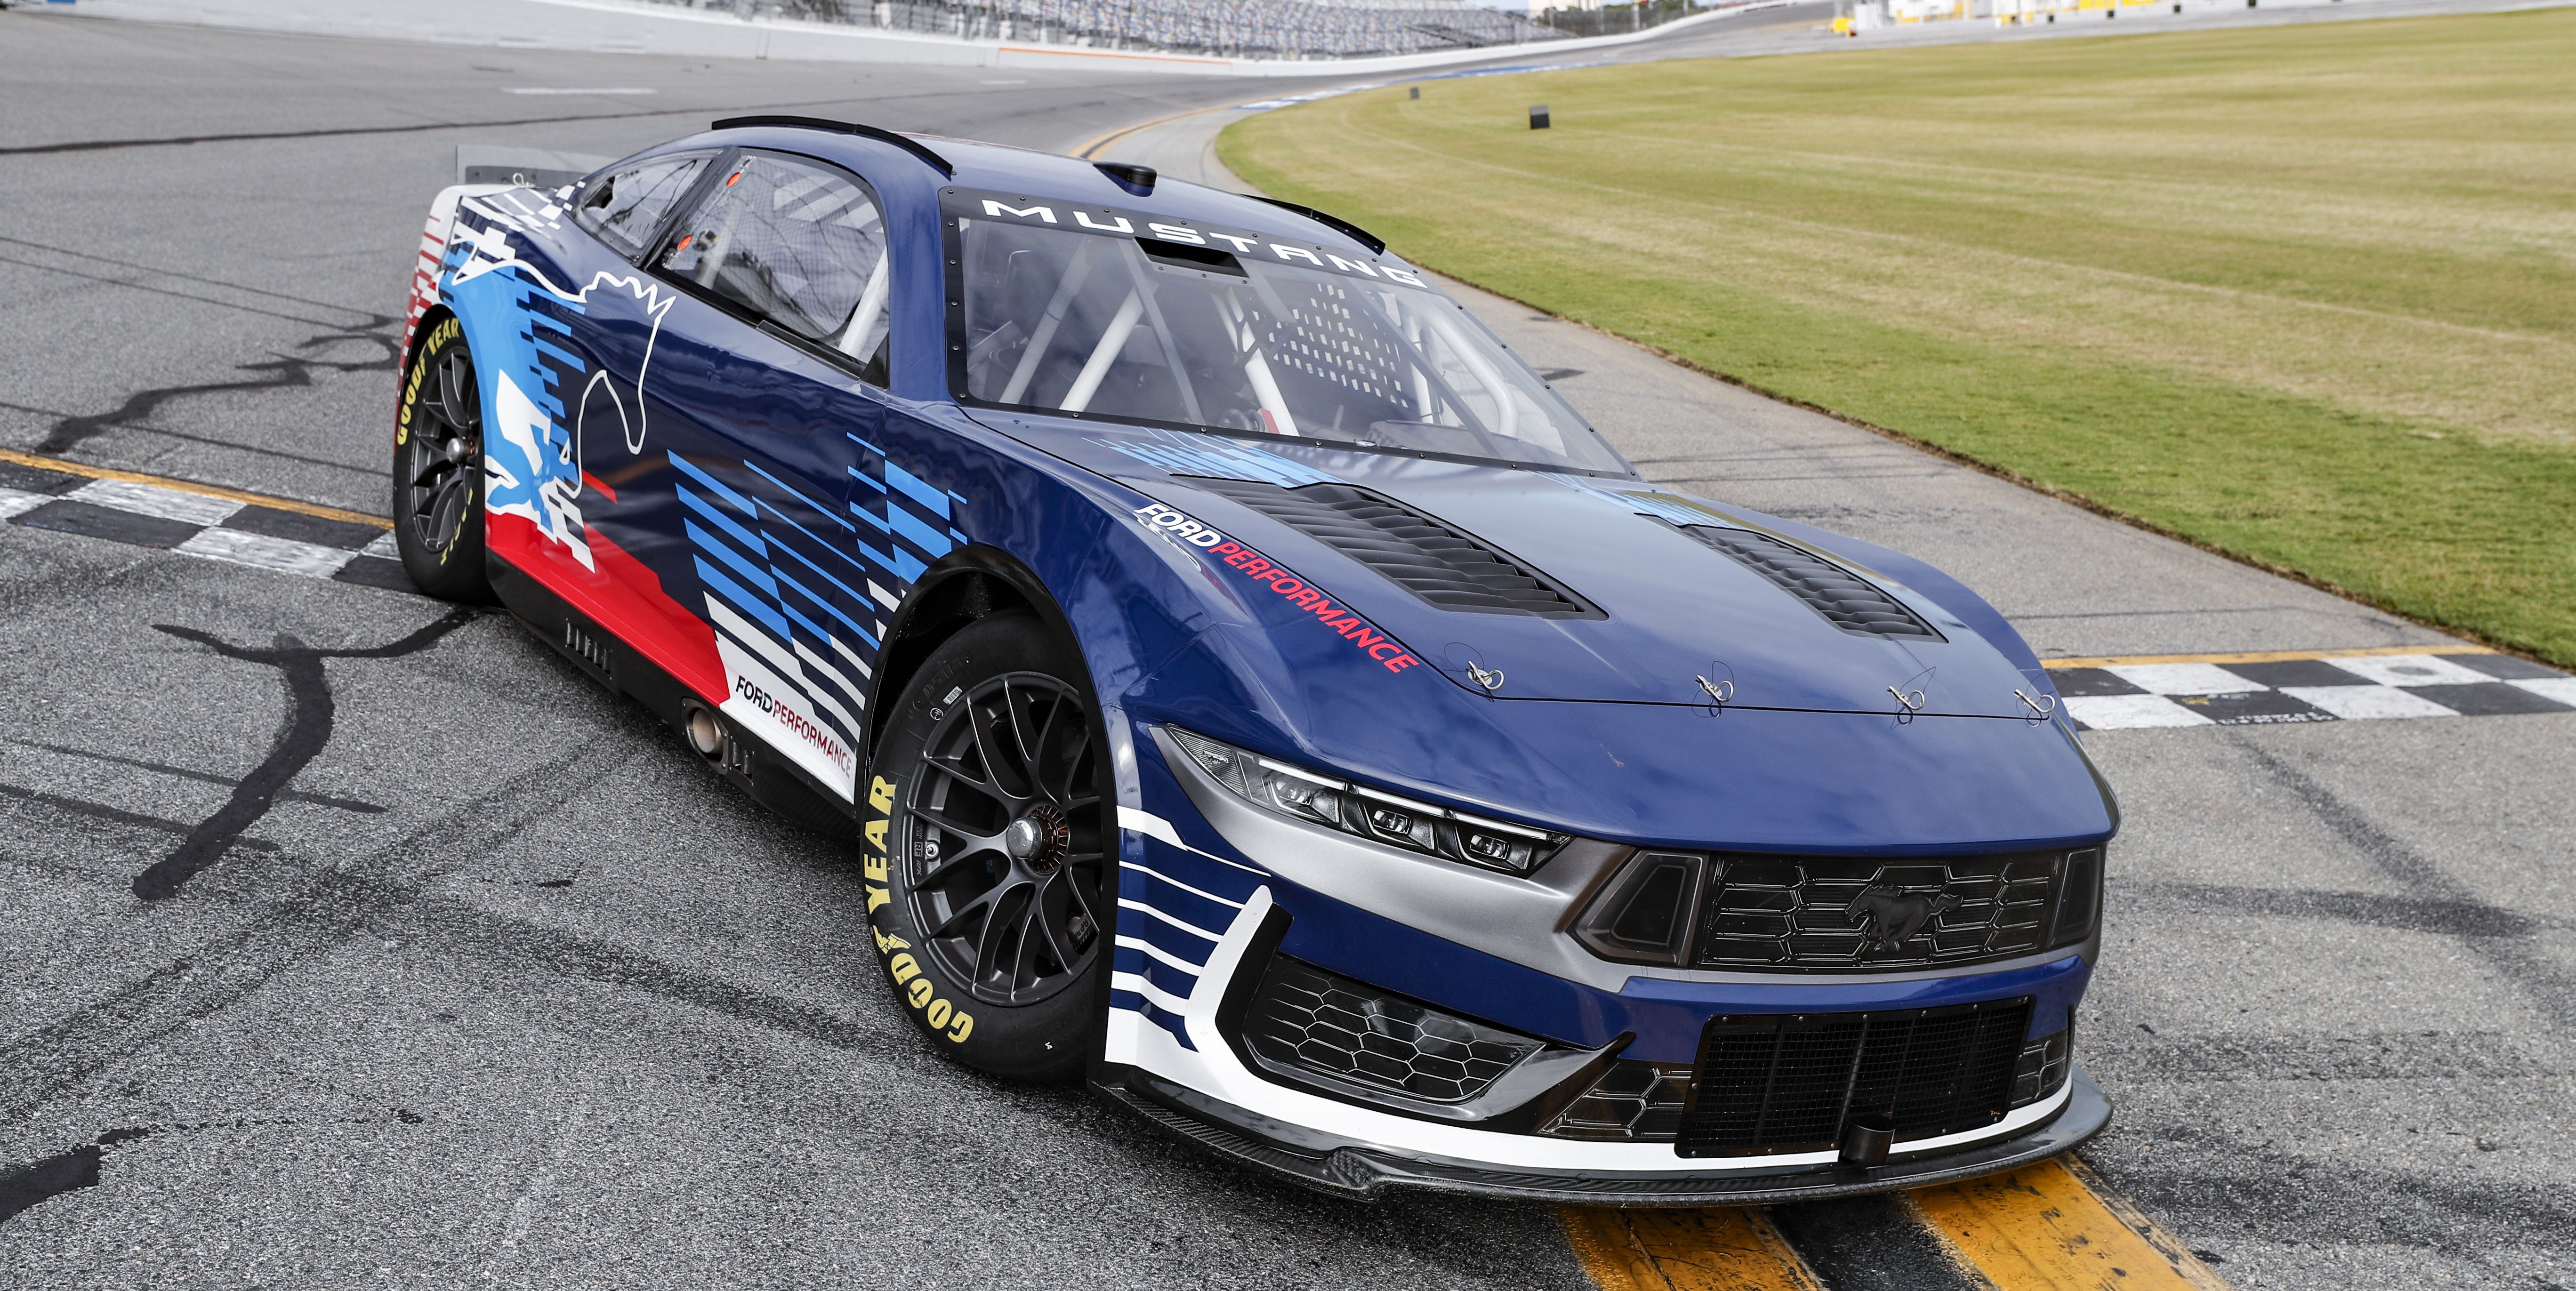 The Ford Mustang Dark Horse Is Ready for NASCAR